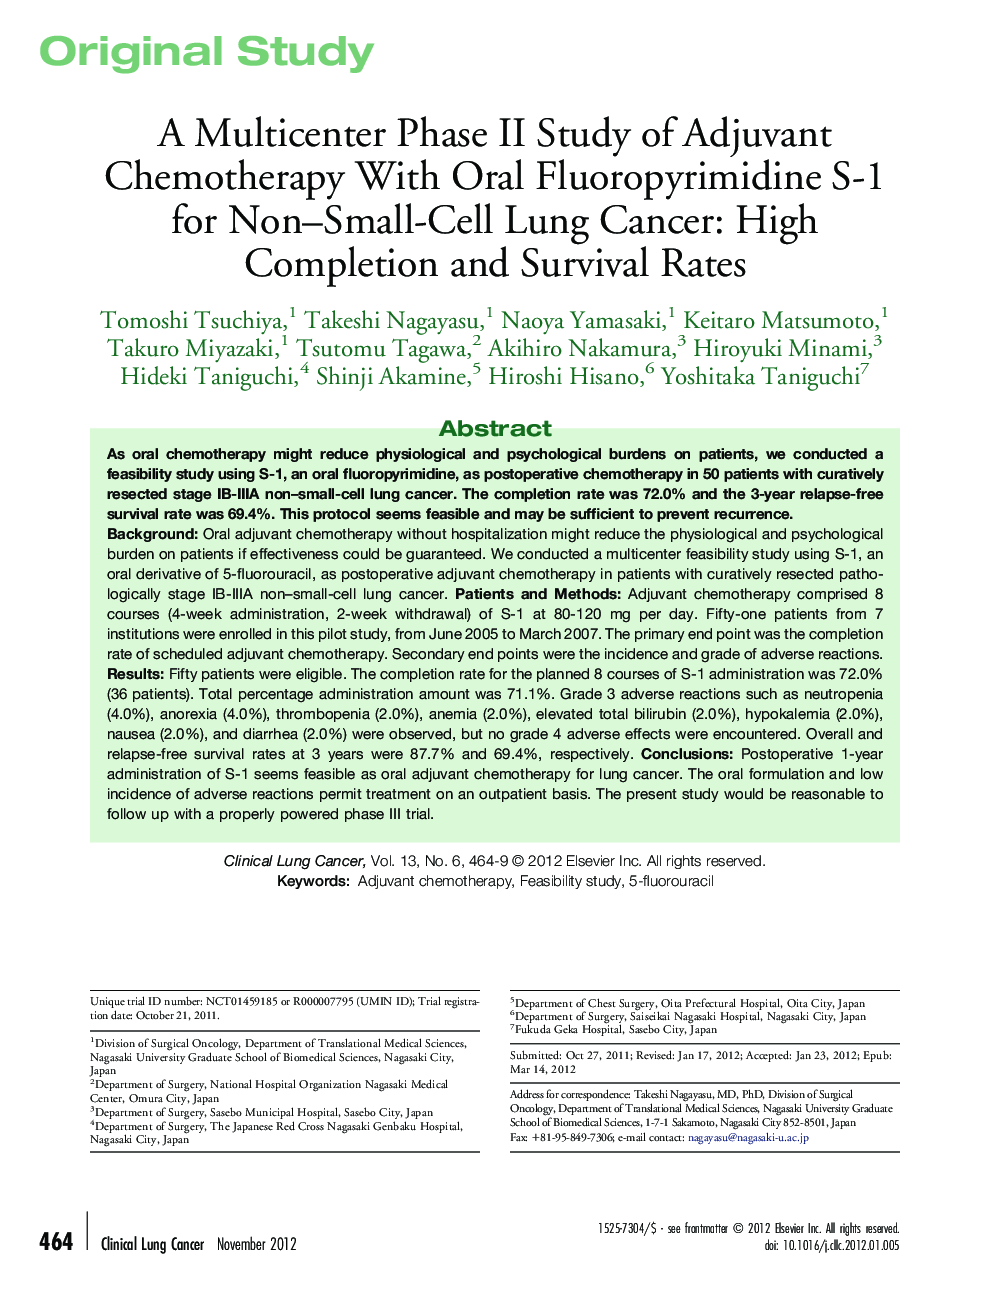 A Multicenter Phase II Study of Adjuvant Chemotherapy With Oral Fluoropyrimidine S-1 for Non–Small-Cell Lung Cancer: High Completion and Survival Rates 